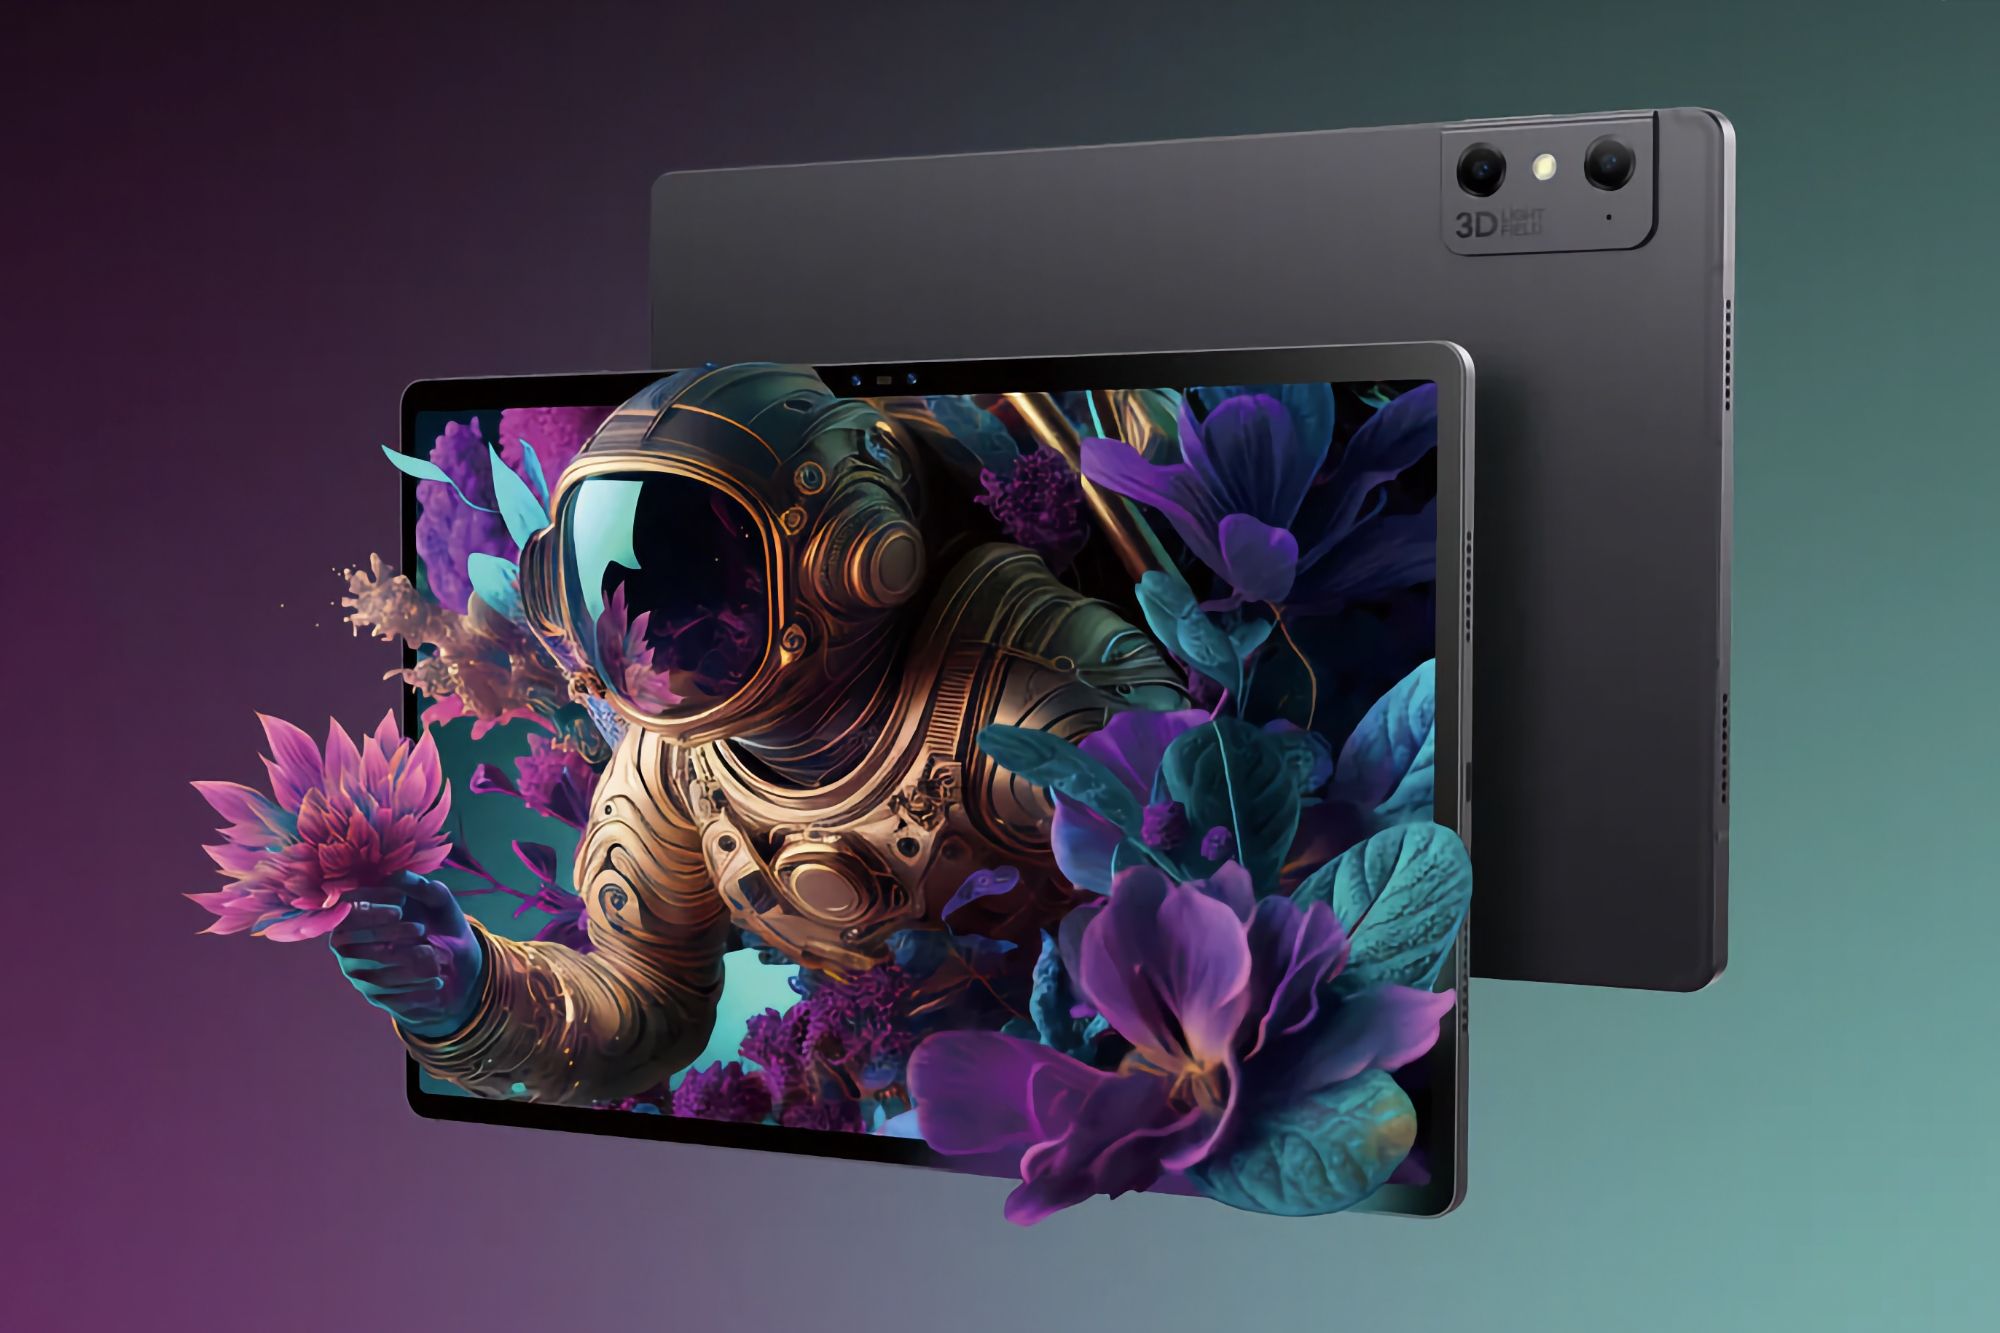 $100 off: ZTE opens pre-order for nubia Pad 3D tablet that can play 3D without glasses